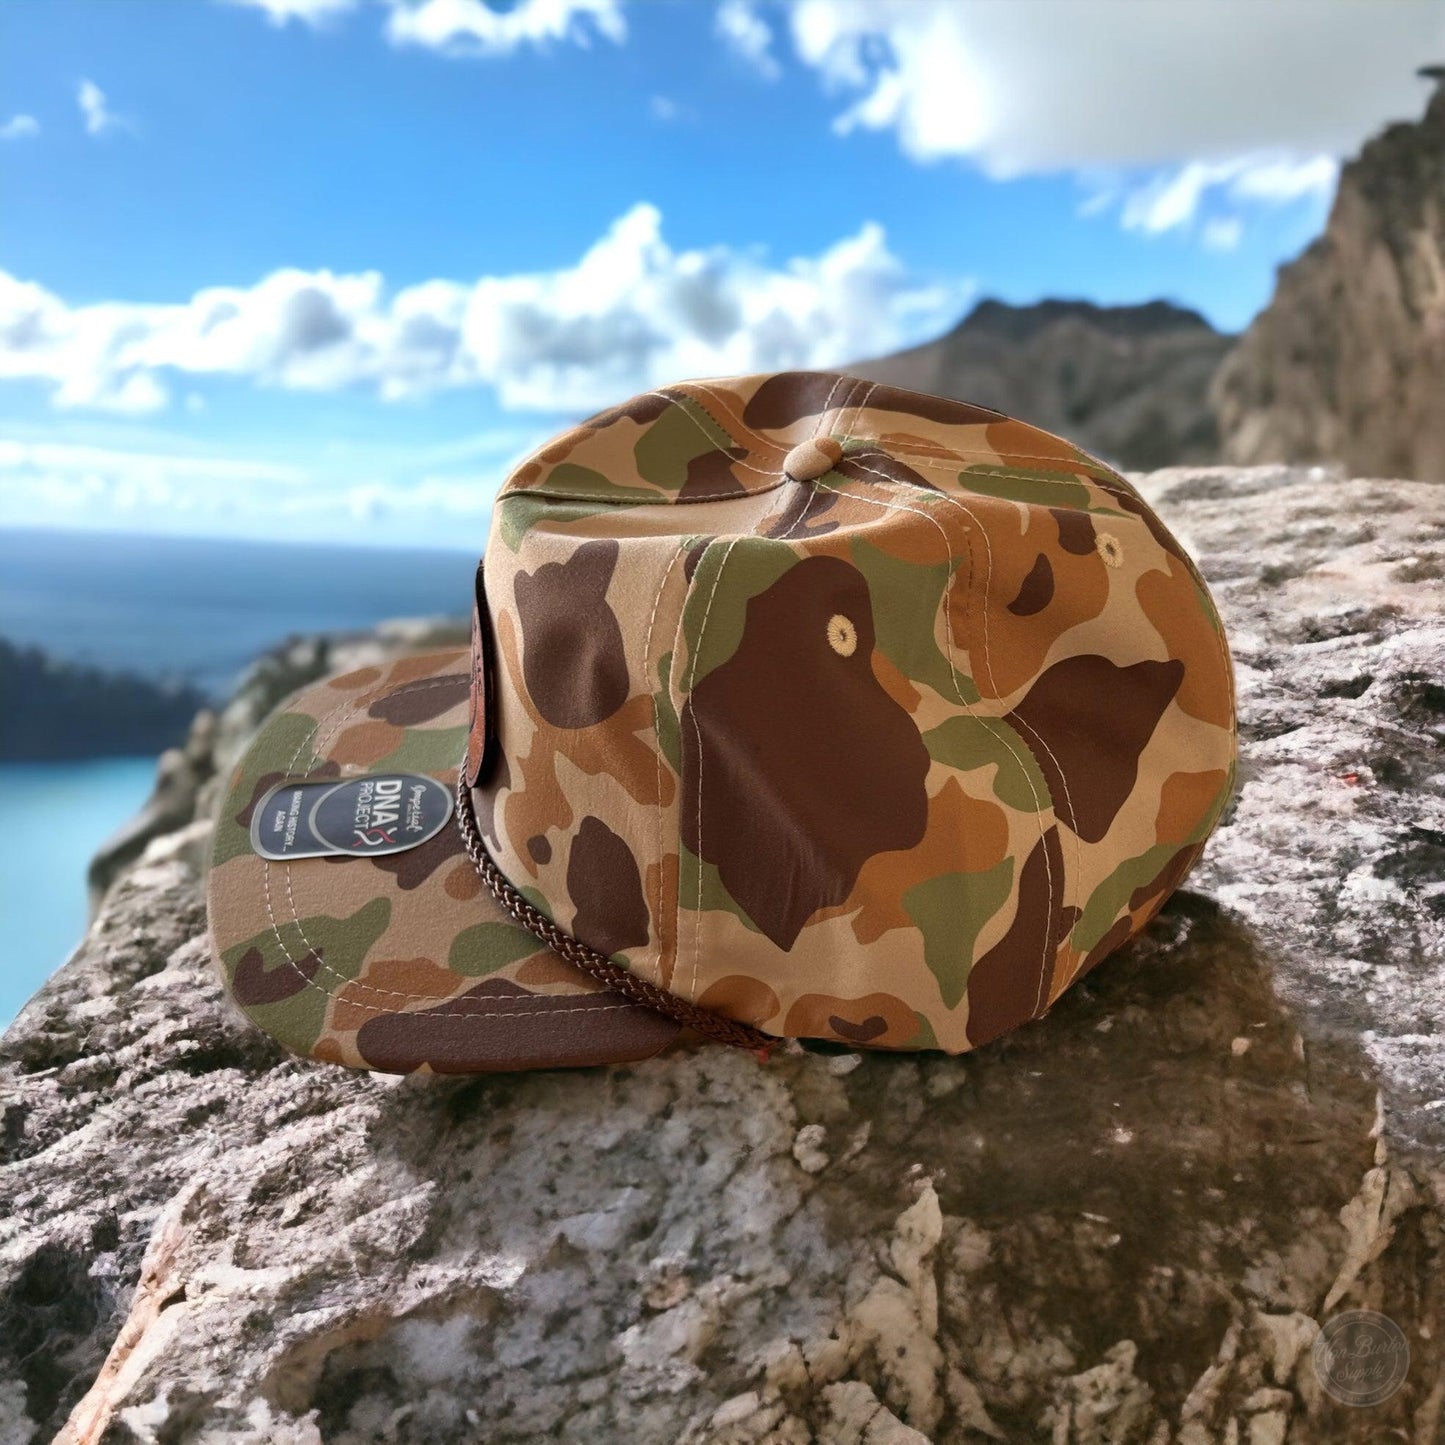 imperial dna frog camo rope hat, custom camo rope patch hat, custom hawaiian floral rope patch hats, floral flower rope hawaiian rope grandna hats, custom floral hawaiian rope hats, camo rope patch hats, vintage camo rope hats, grandpa rope hats